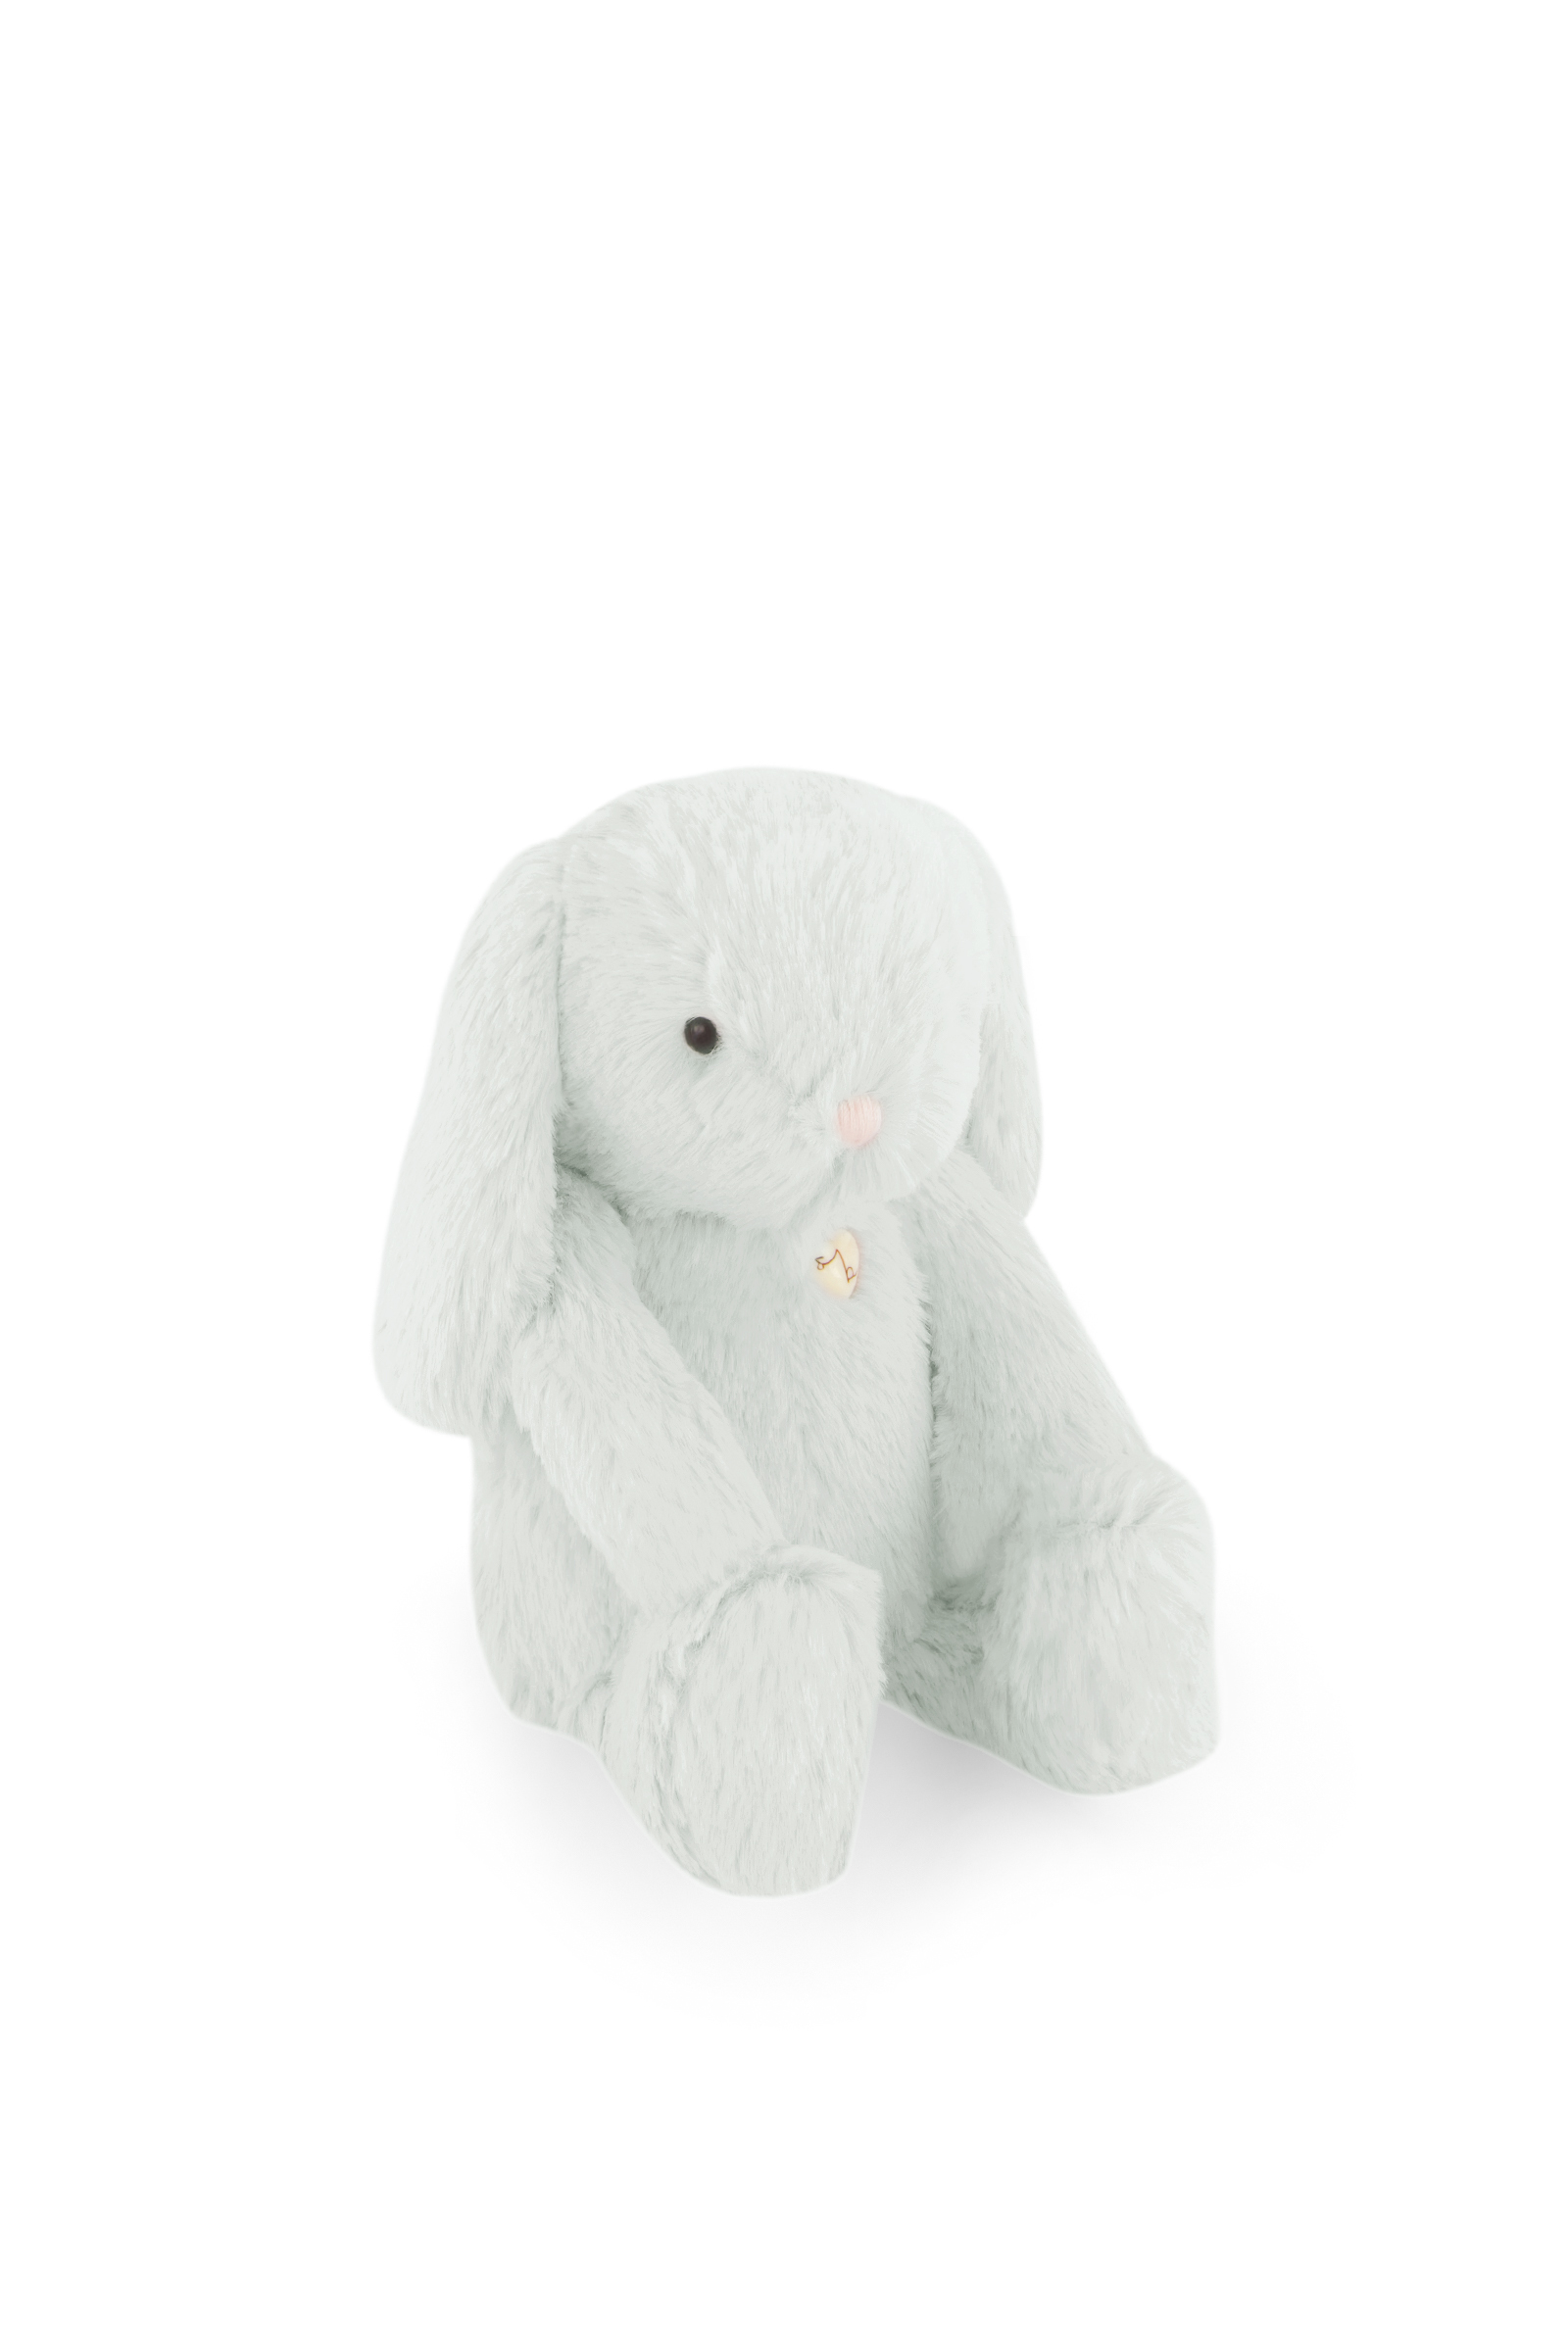 Snuggle Bunnies 20cm Penelope The Bunny - Willow Front_Side